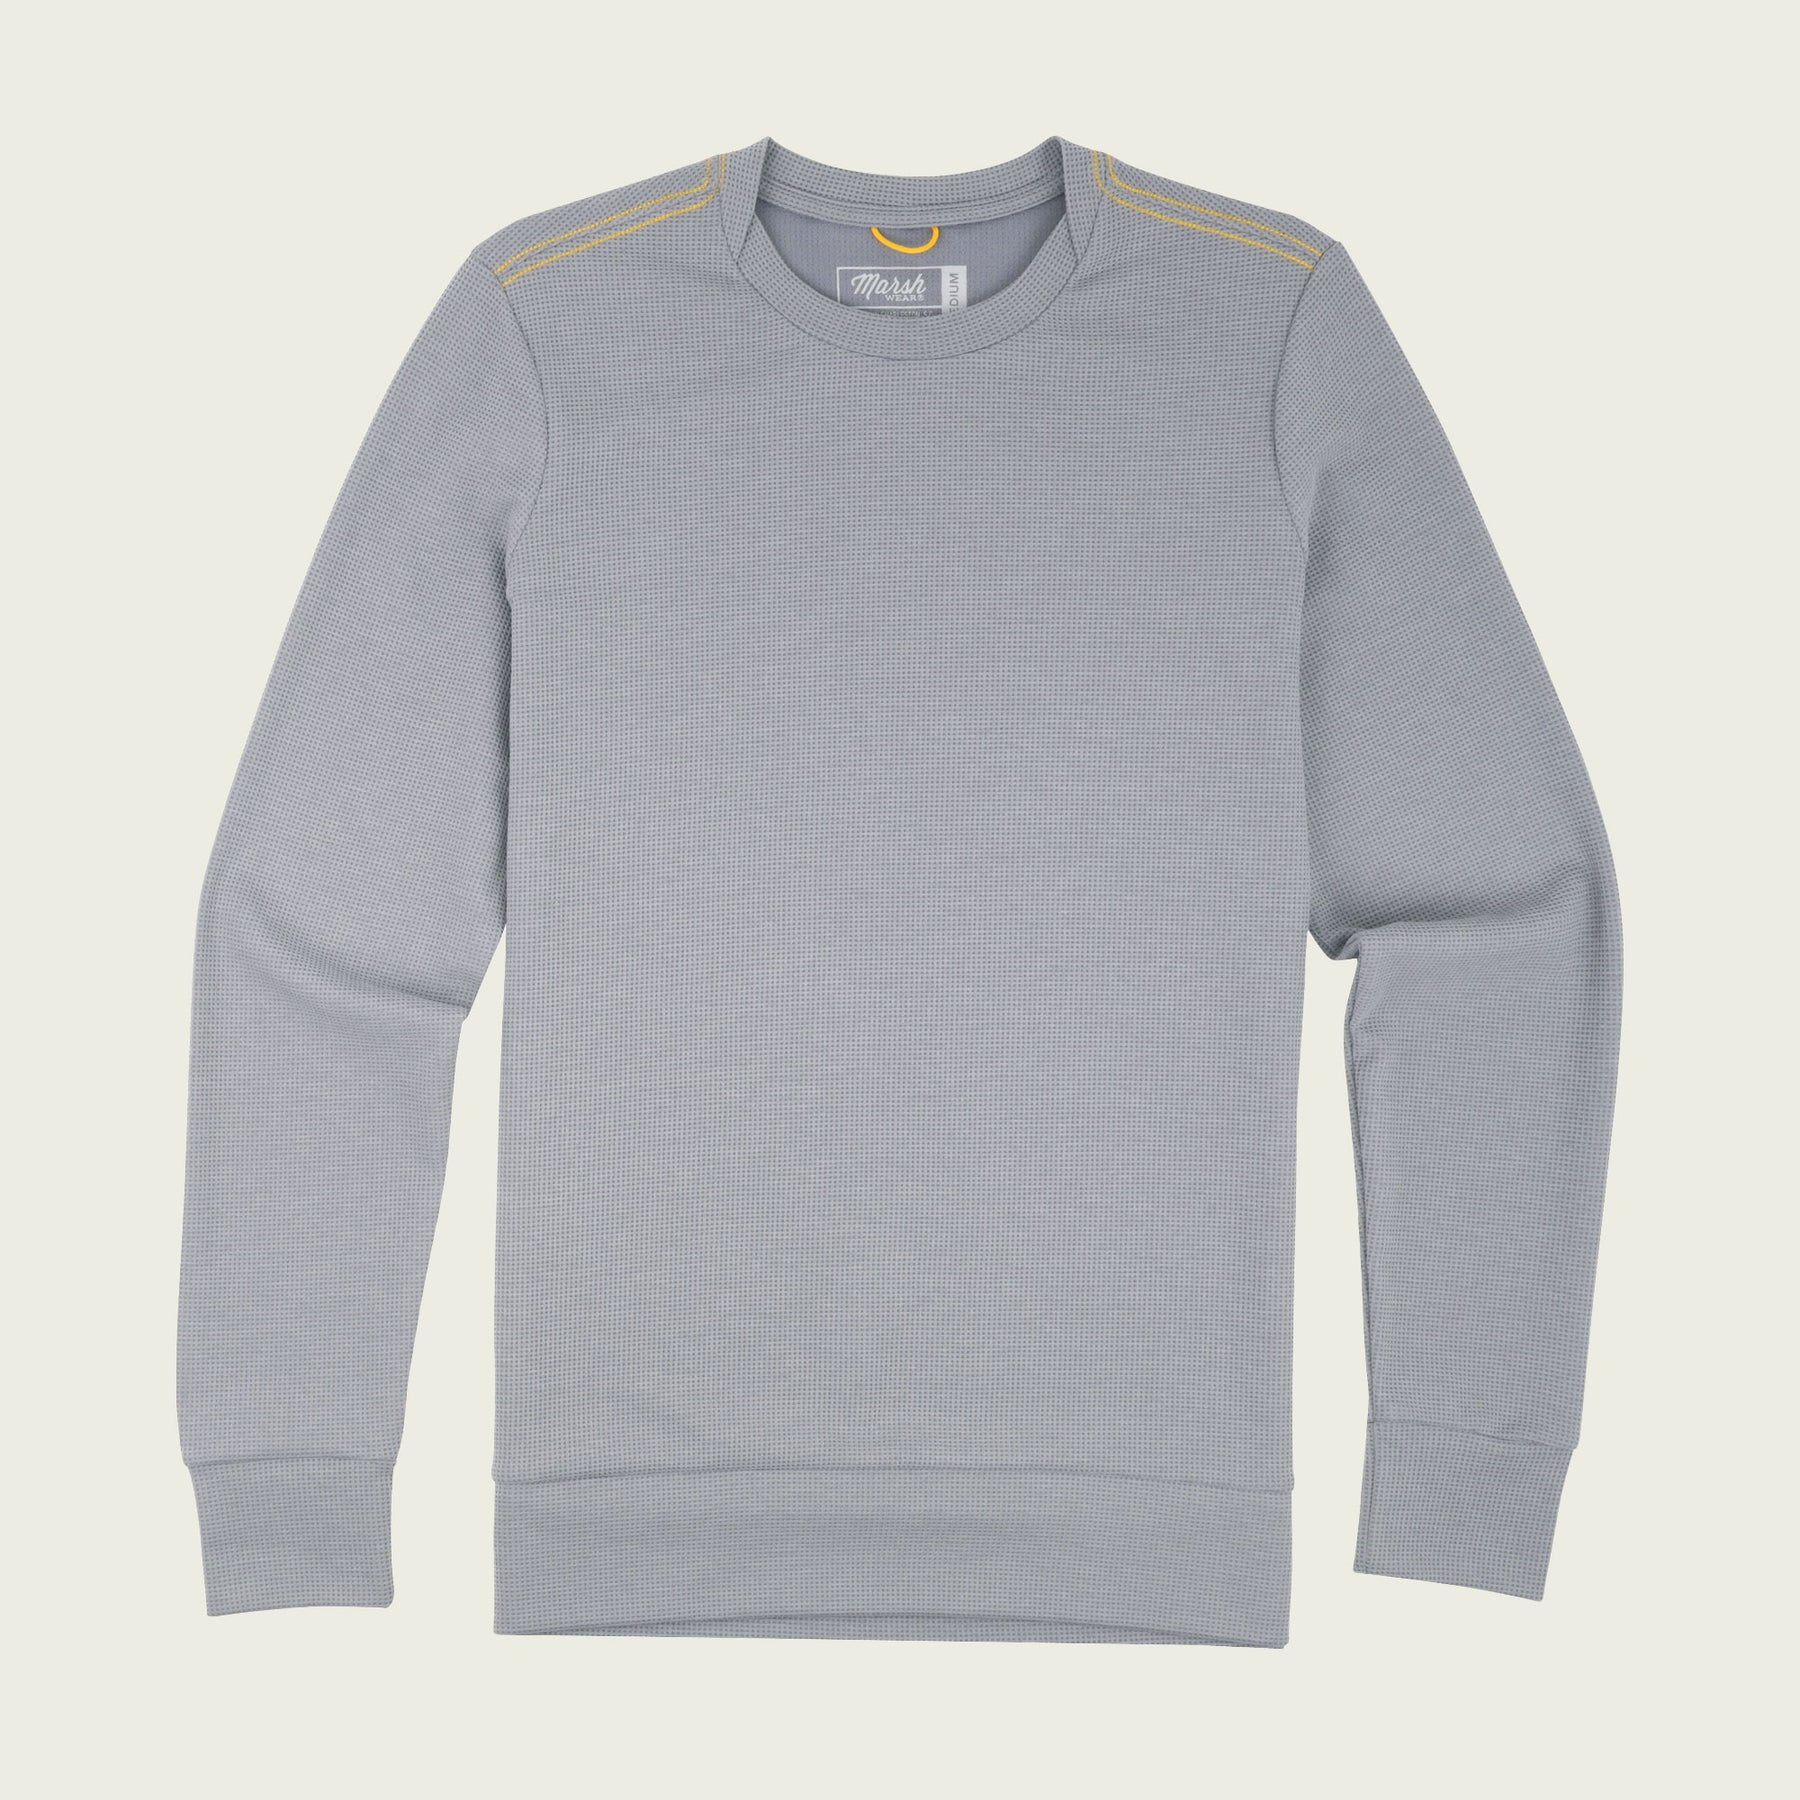 Tyber Clothing Wear Thermal Marsh Crew –